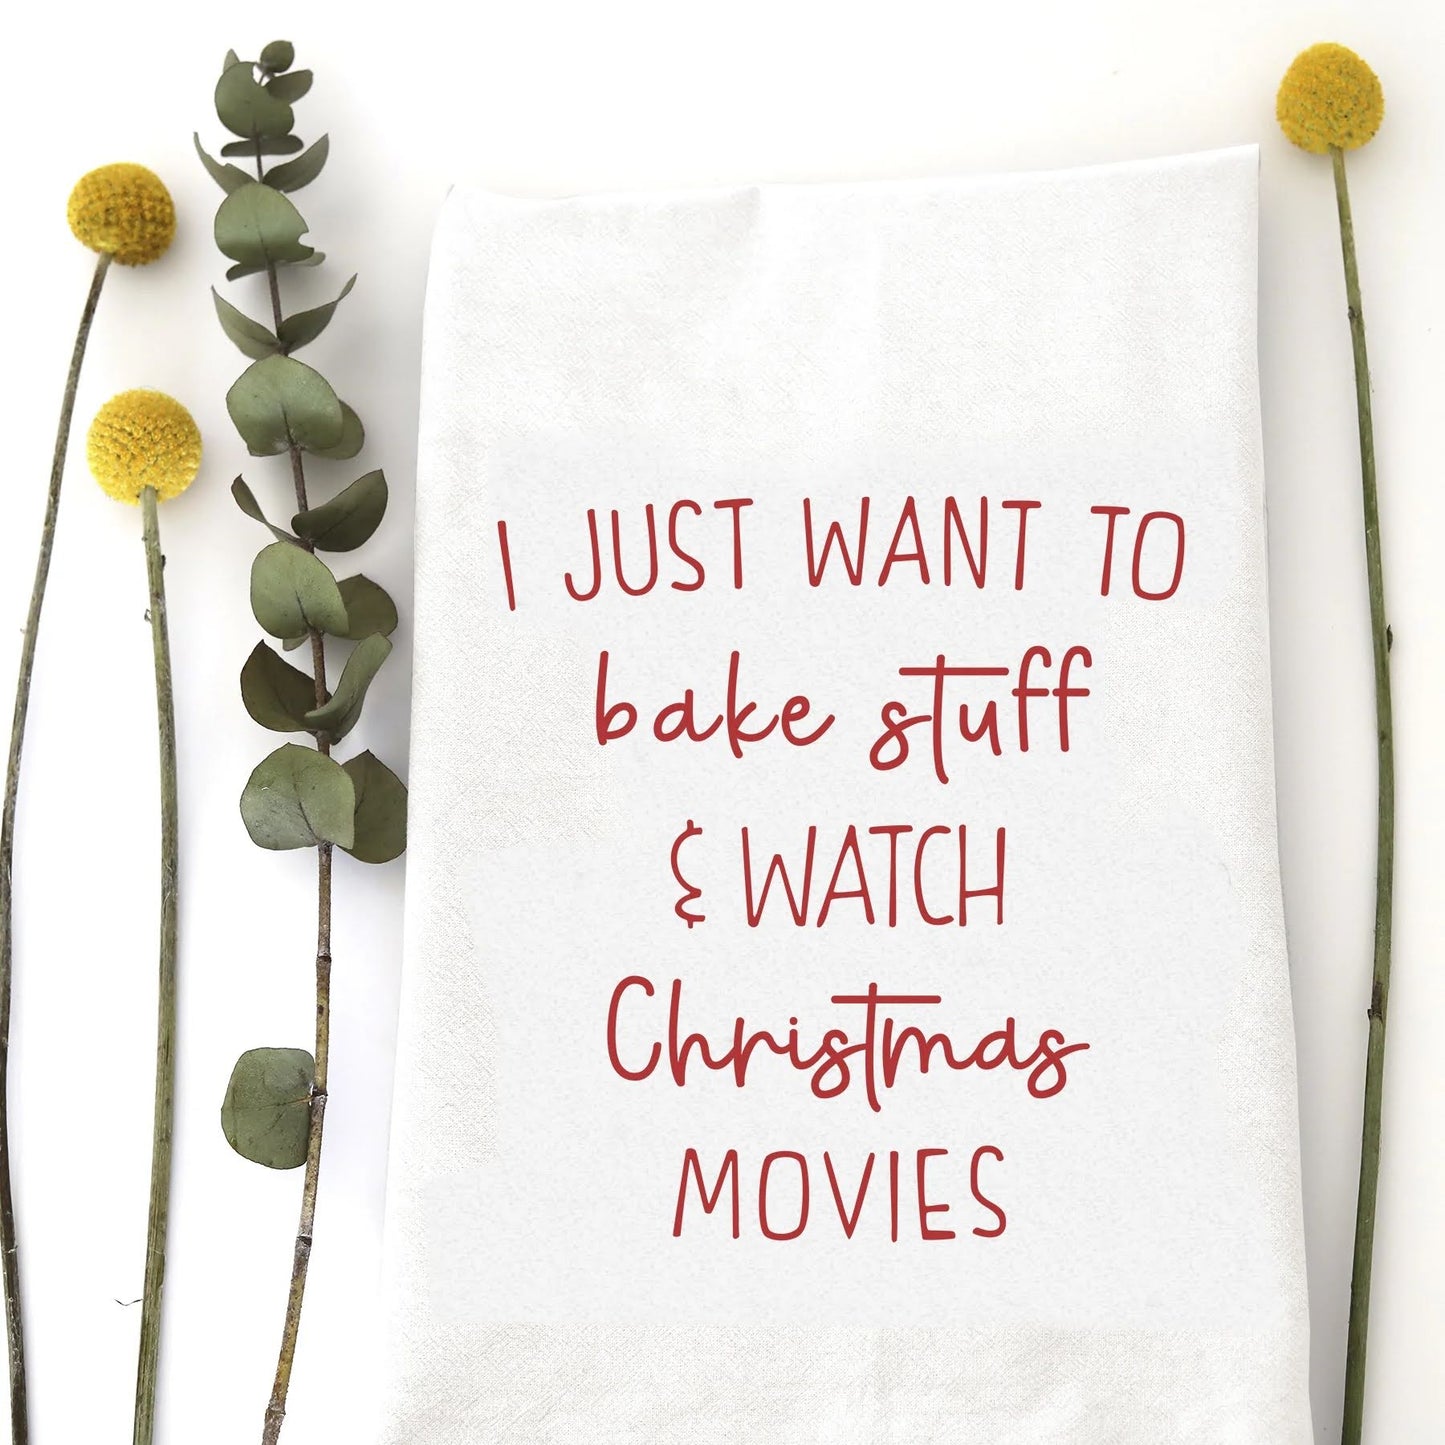 A holiday tea towel with the words "I just want to bake stuff & watch Christmas movies" printed on it.